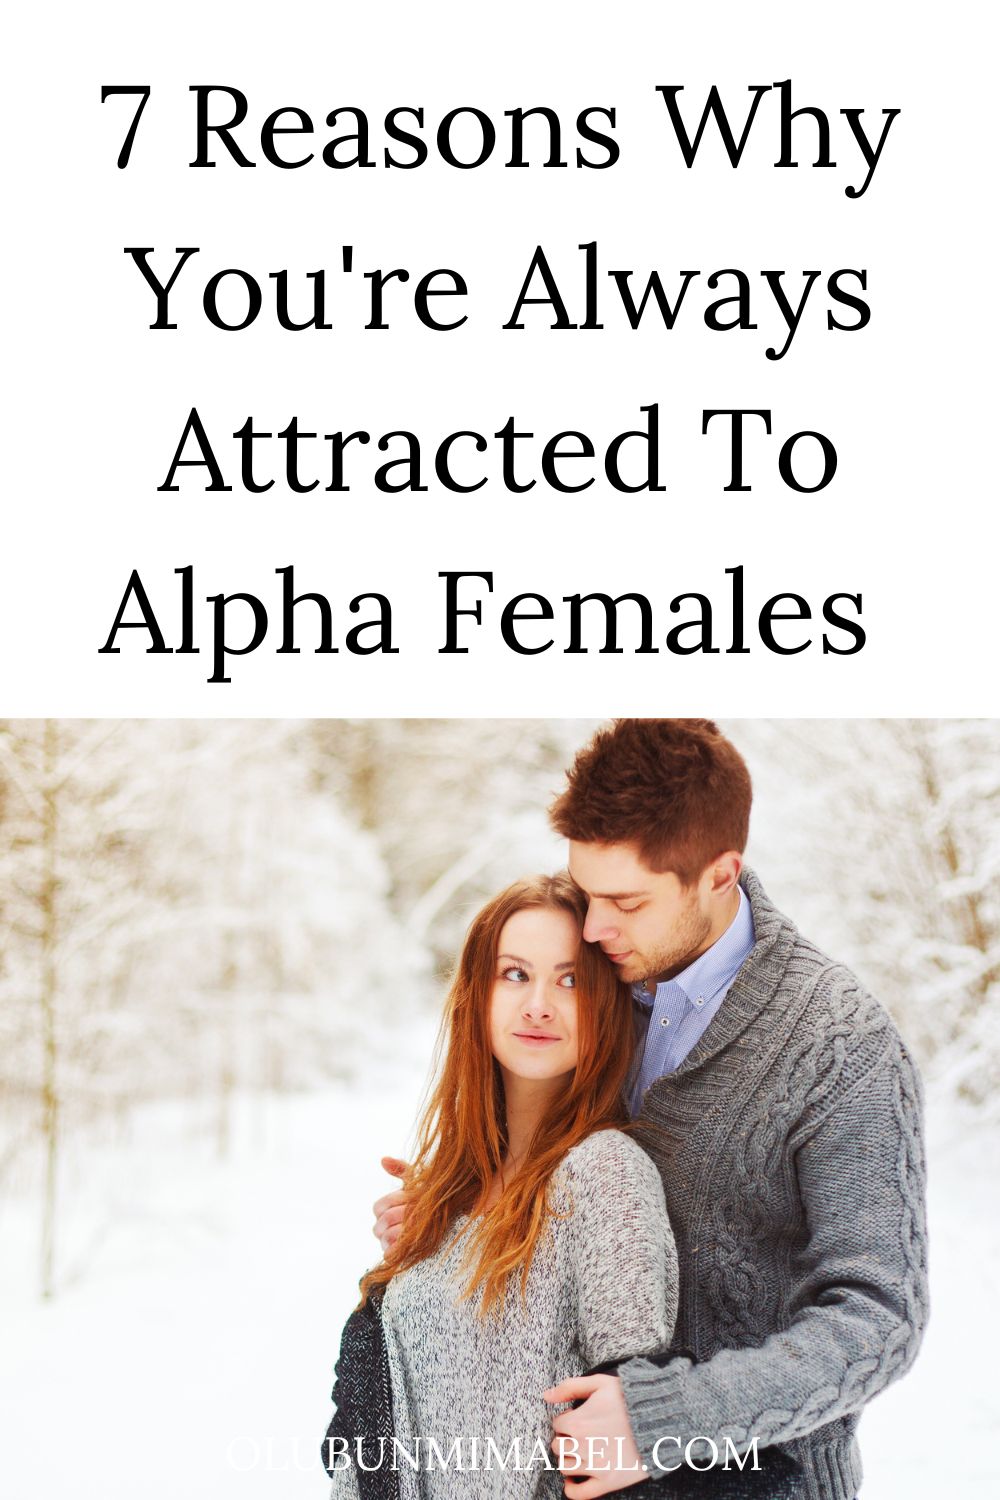 Why Am I Attracted To Alpha Females